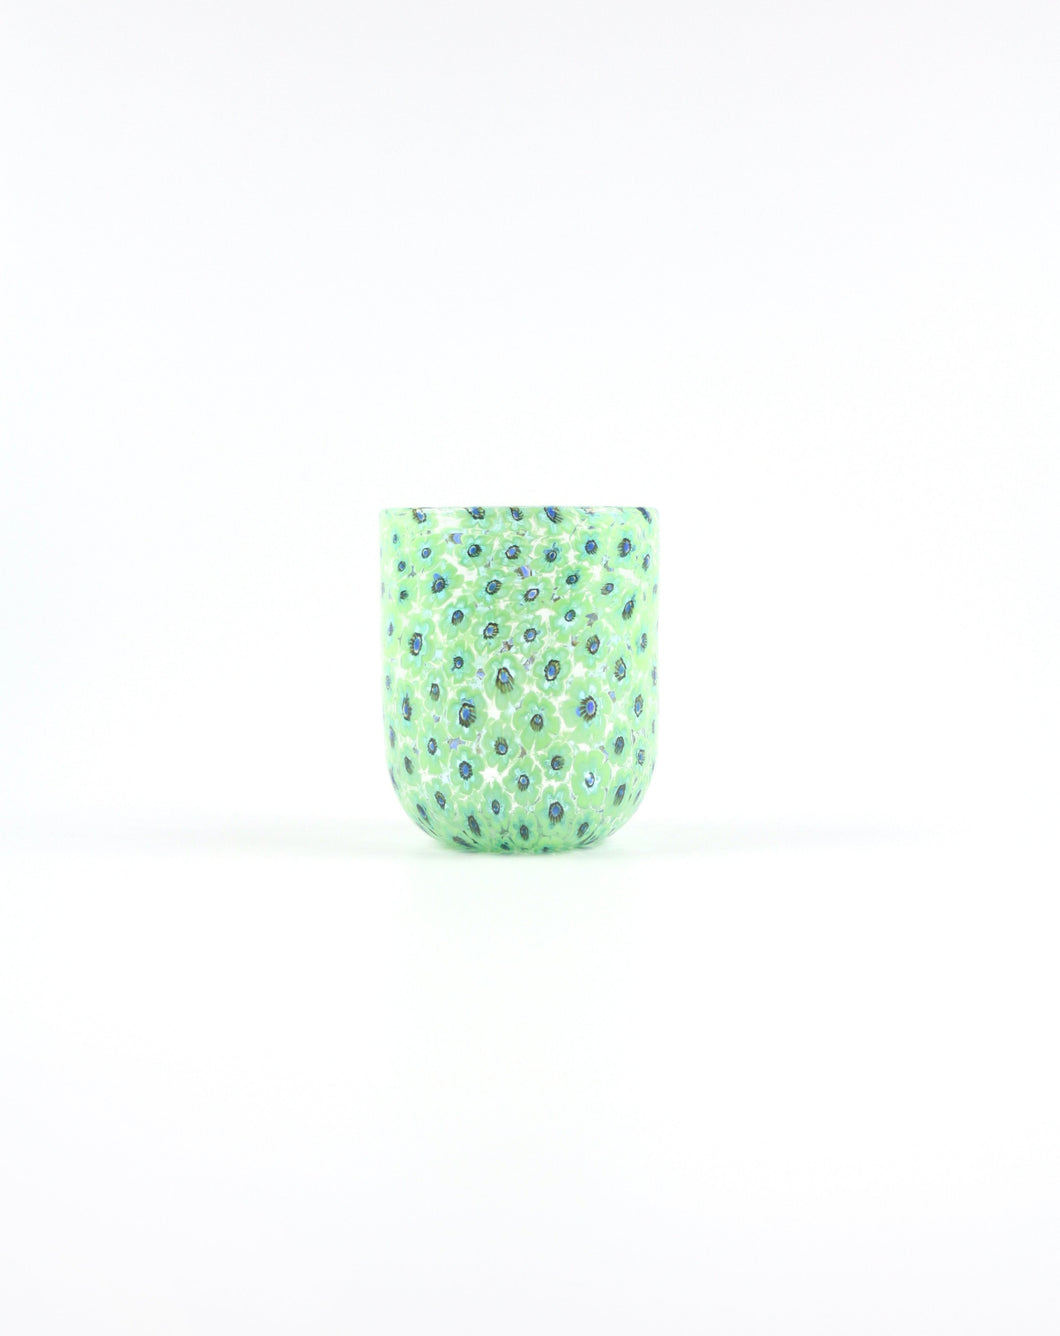 Murano tumbler in light green featuring a petite Murrine floral pattern. Shop the range of Murano tumblers hand sourced by Rebecca Arts online.